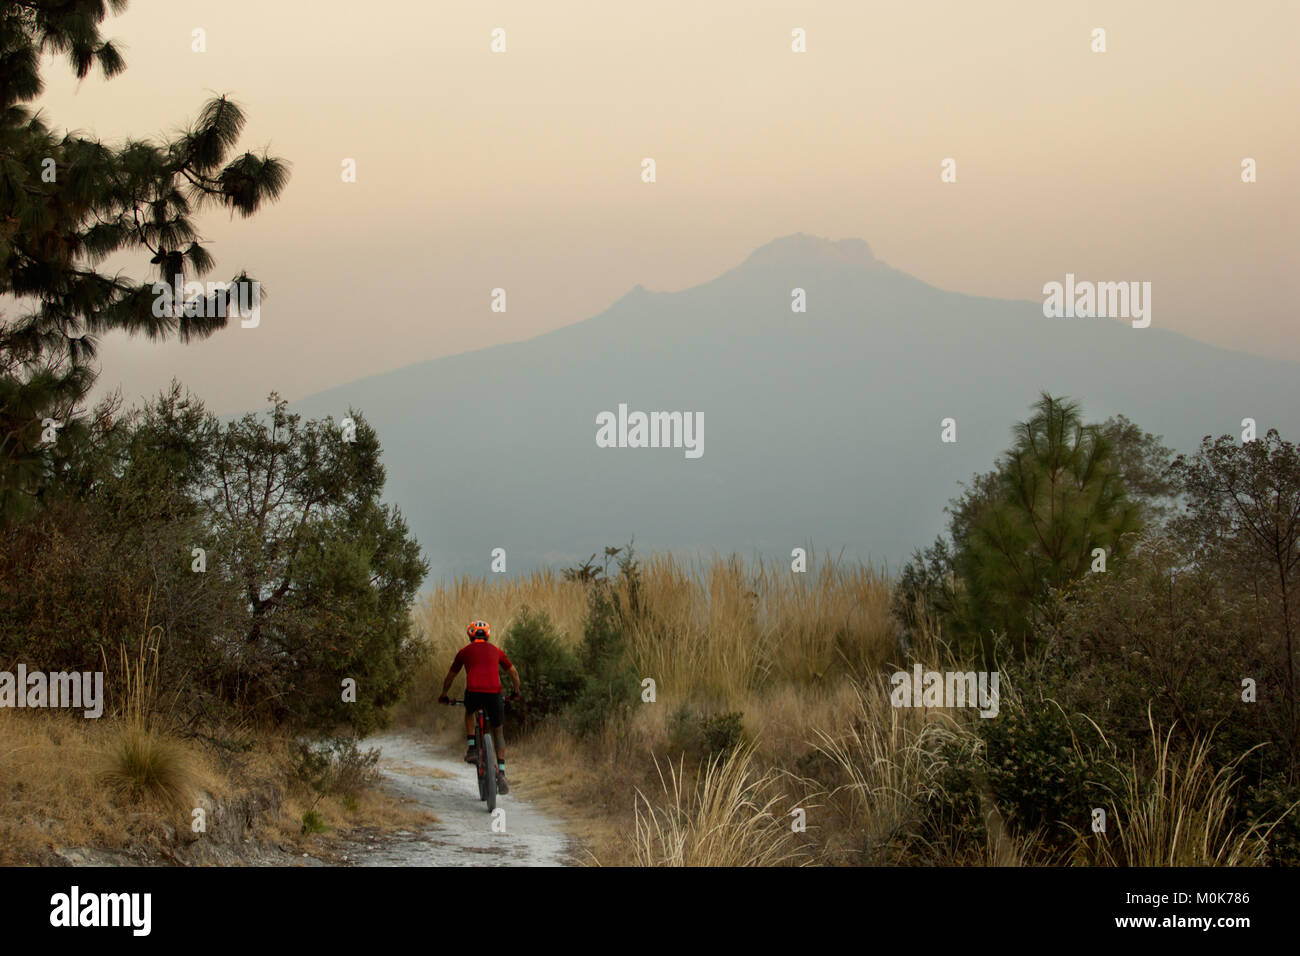 A male mountain bike rider on a trail in Mexico with a Volcano as background Stock Photo